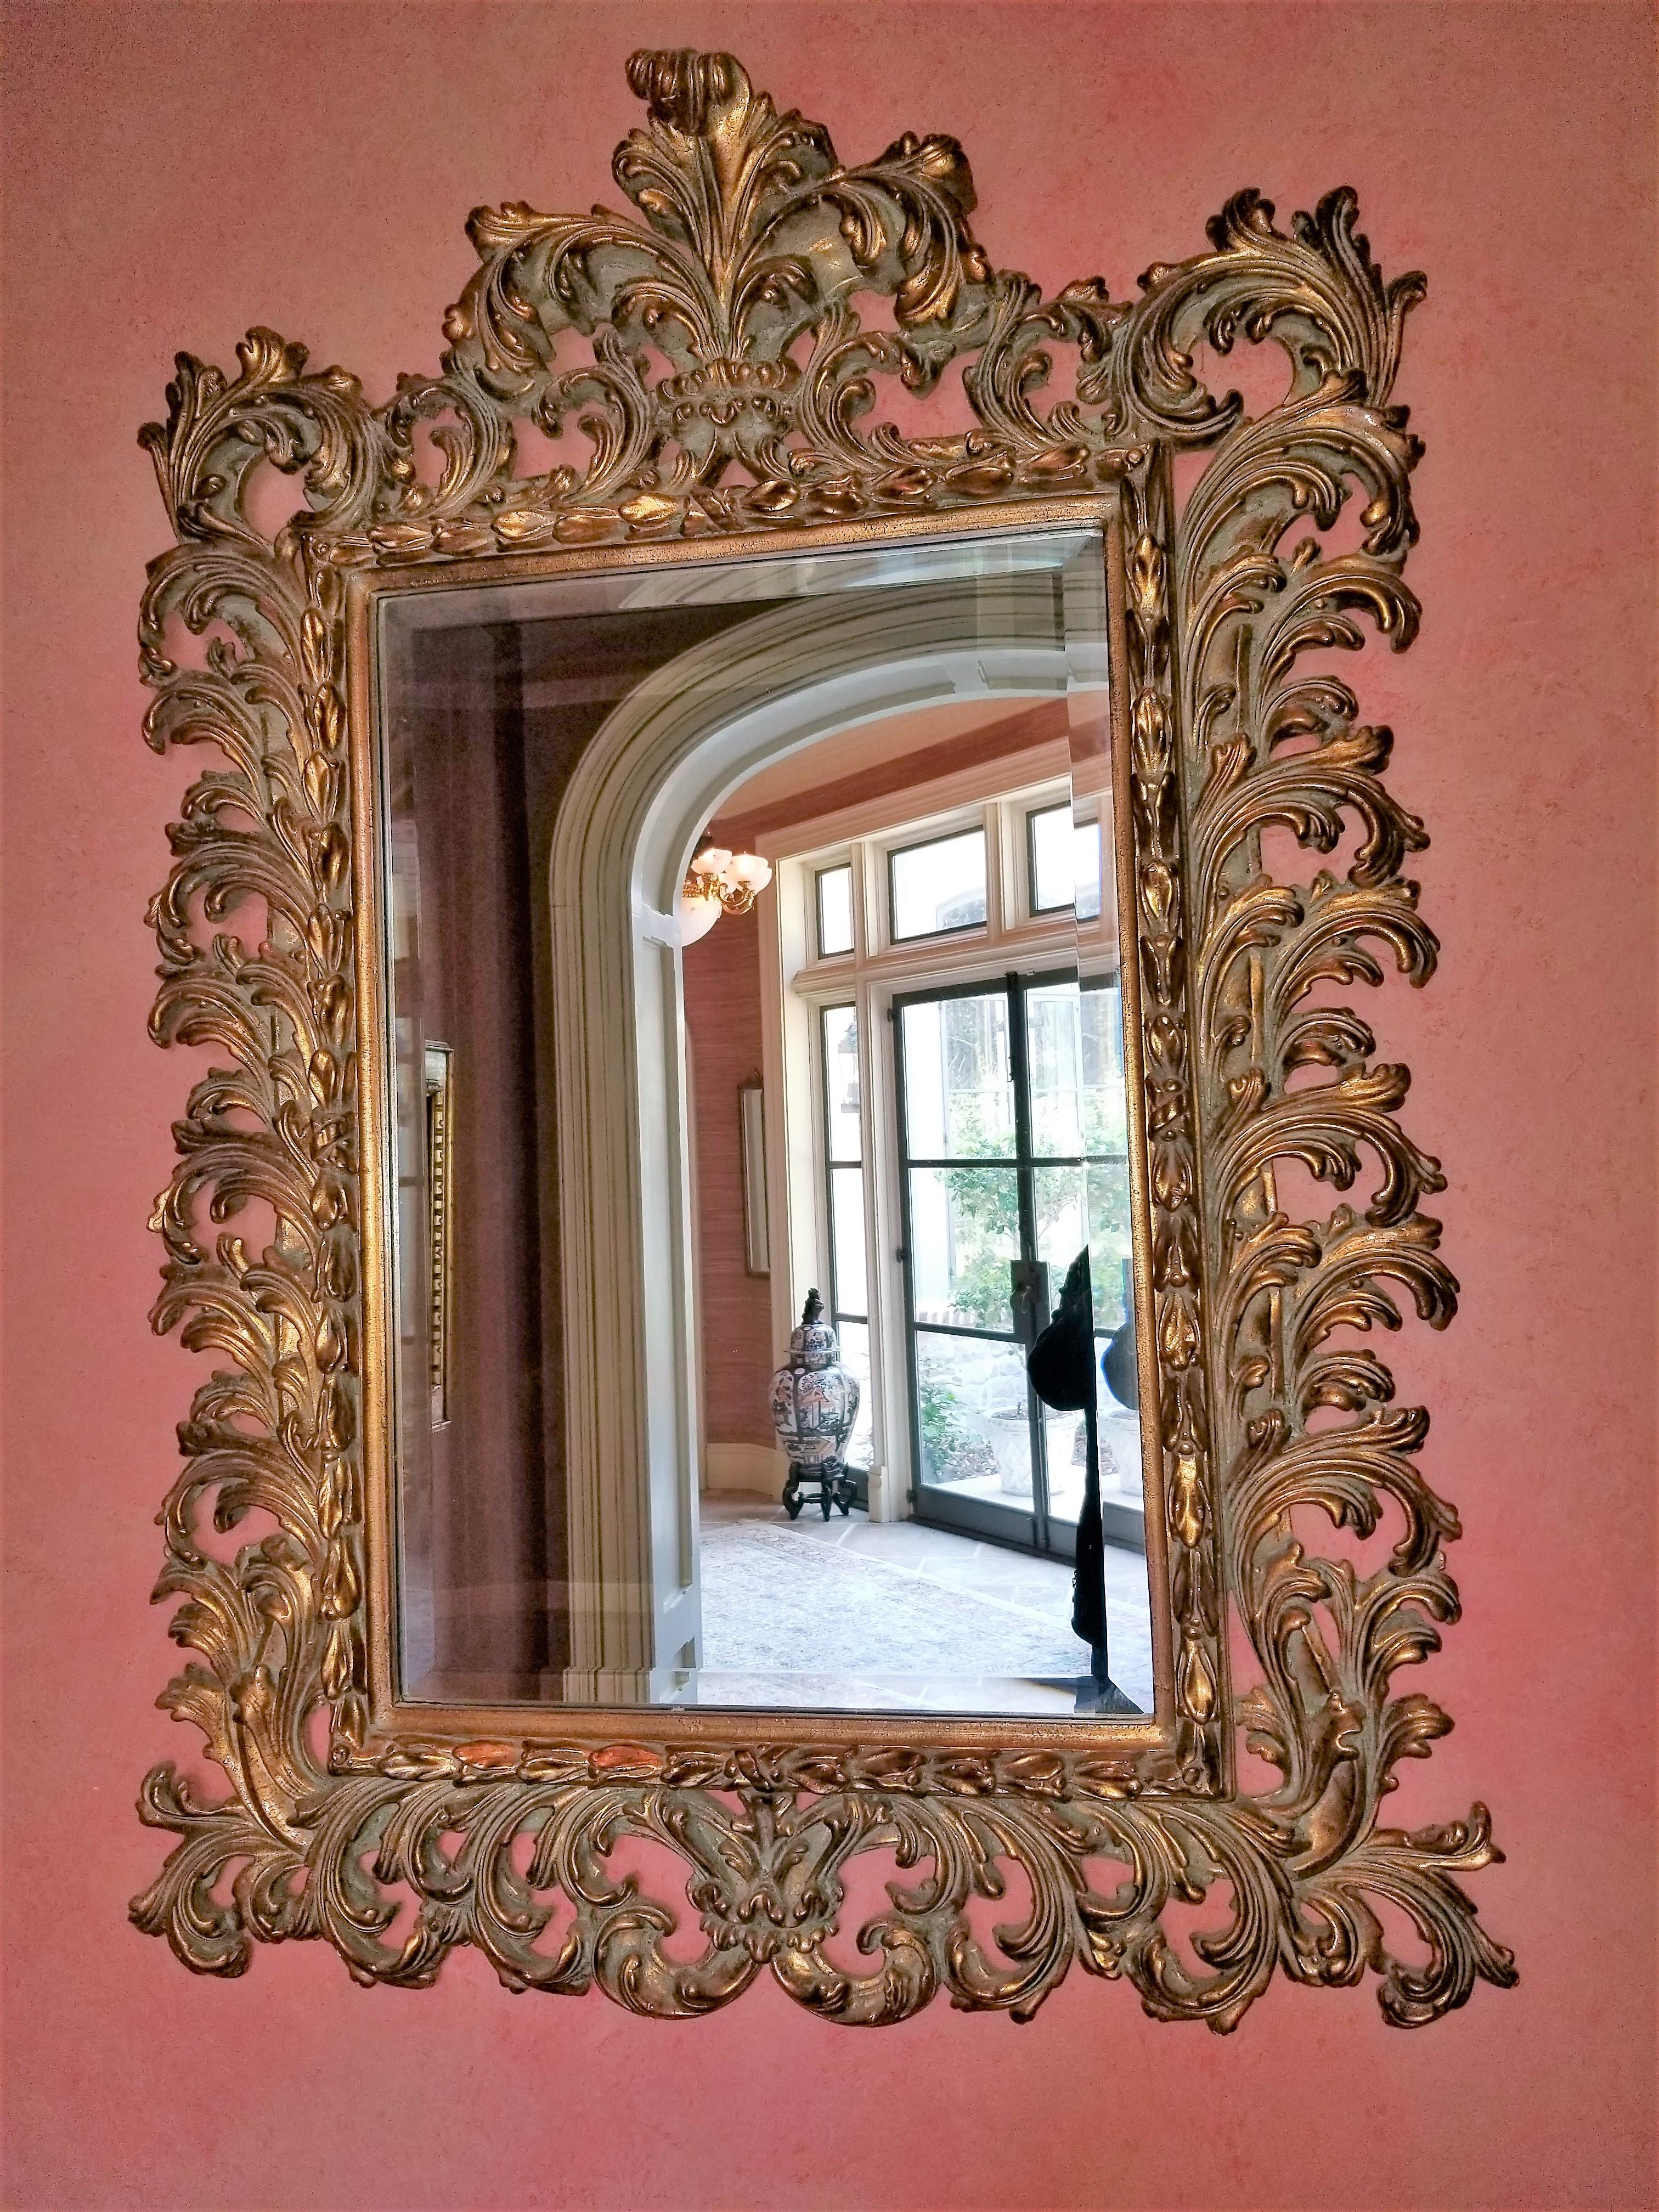 Giltwood mirror decorated with scrolls, 20th century.